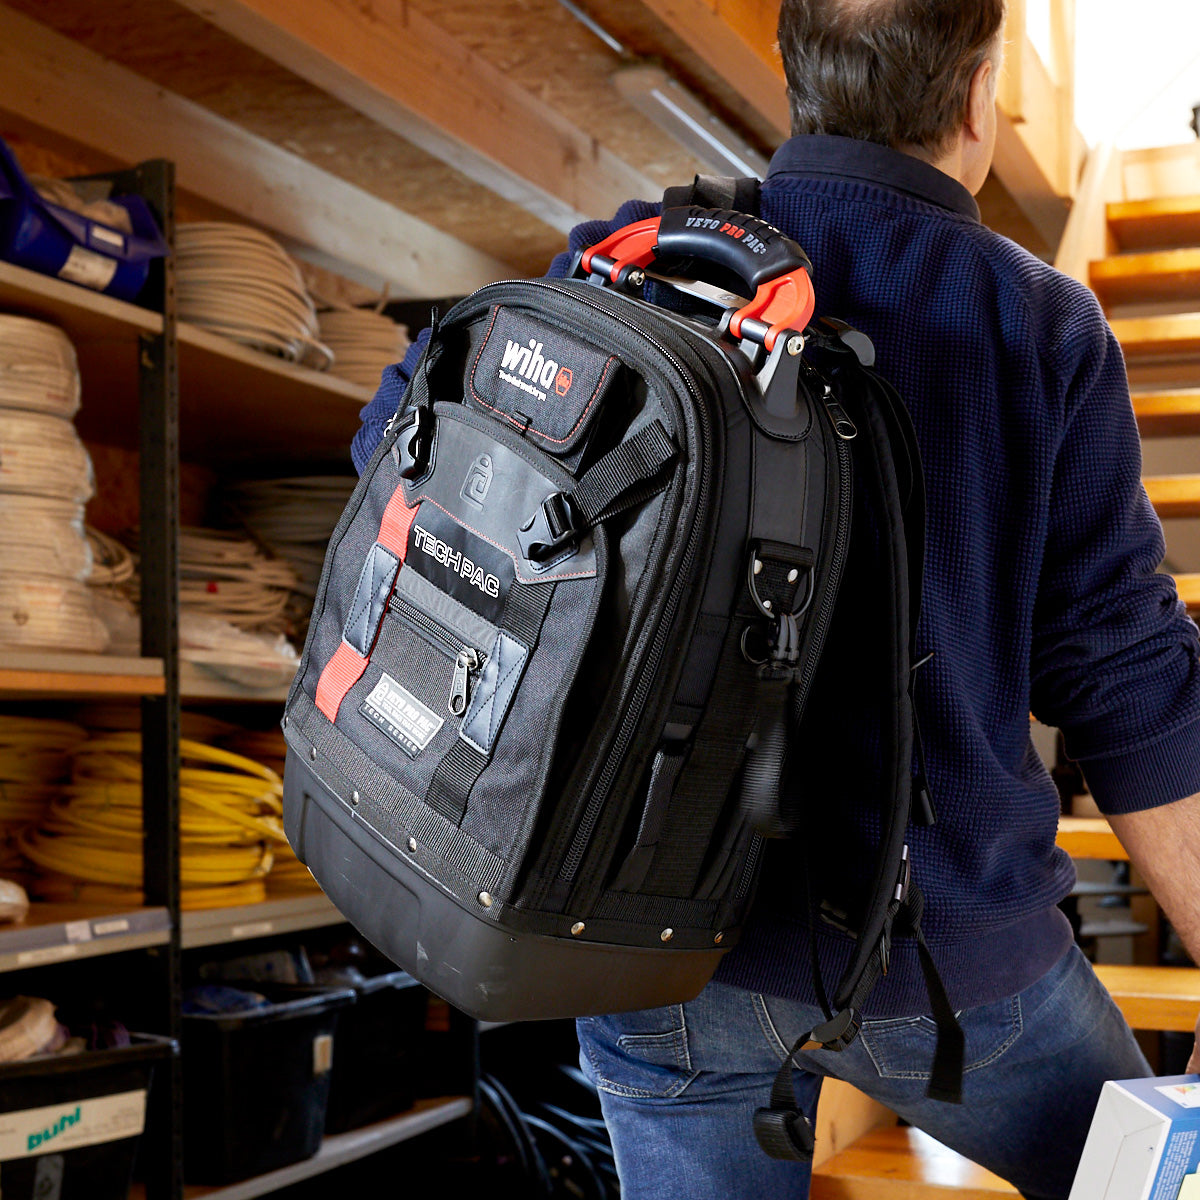 Tool Bags  Compare Heavy Duty Tool Bag Prices  Save